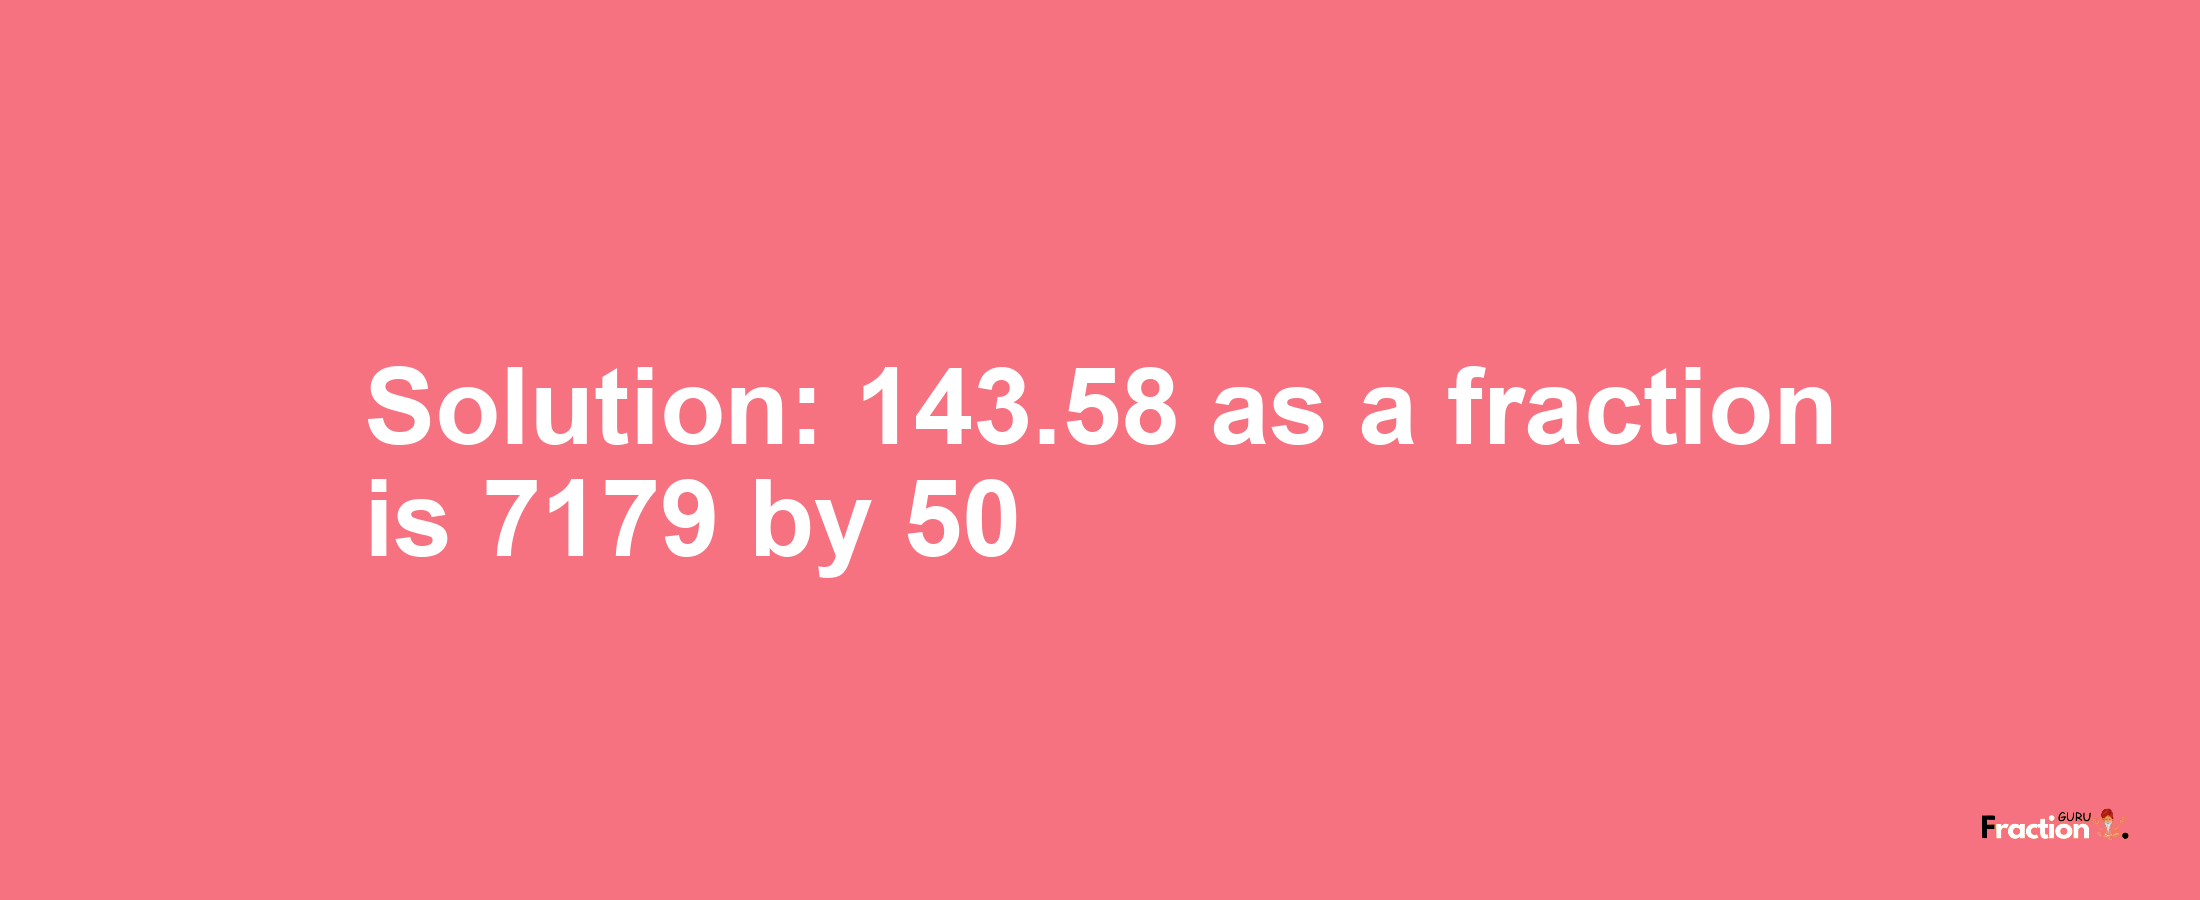 Solution:143.58 as a fraction is 7179/50